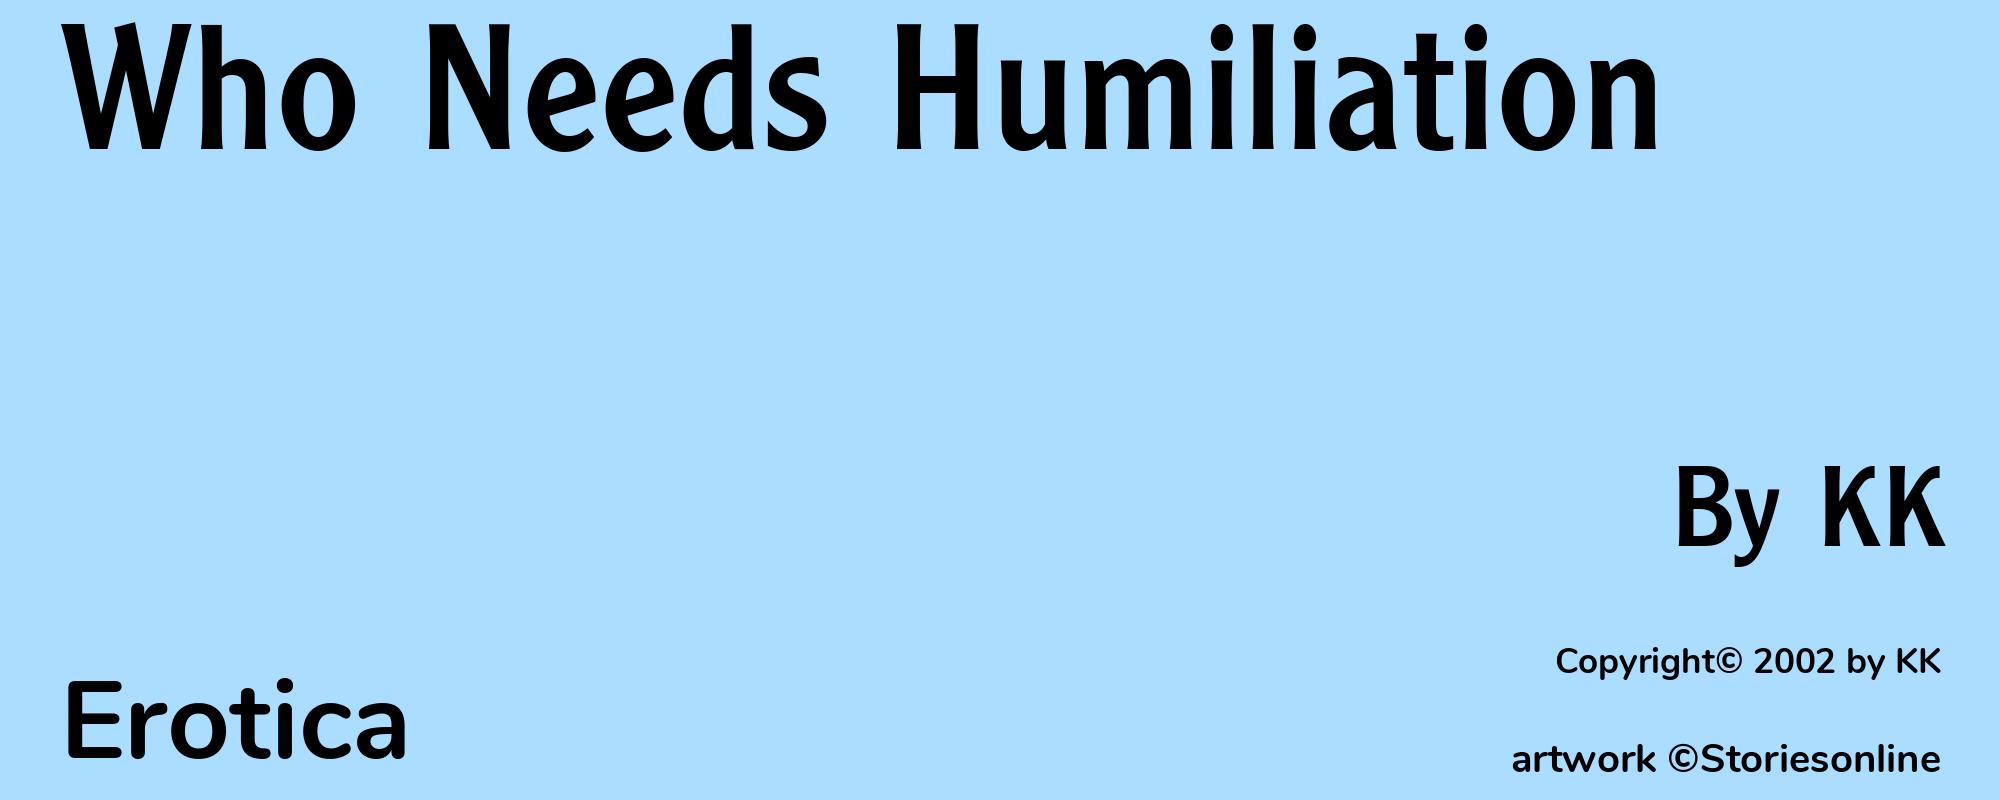 Who Needs Humiliation - Cover